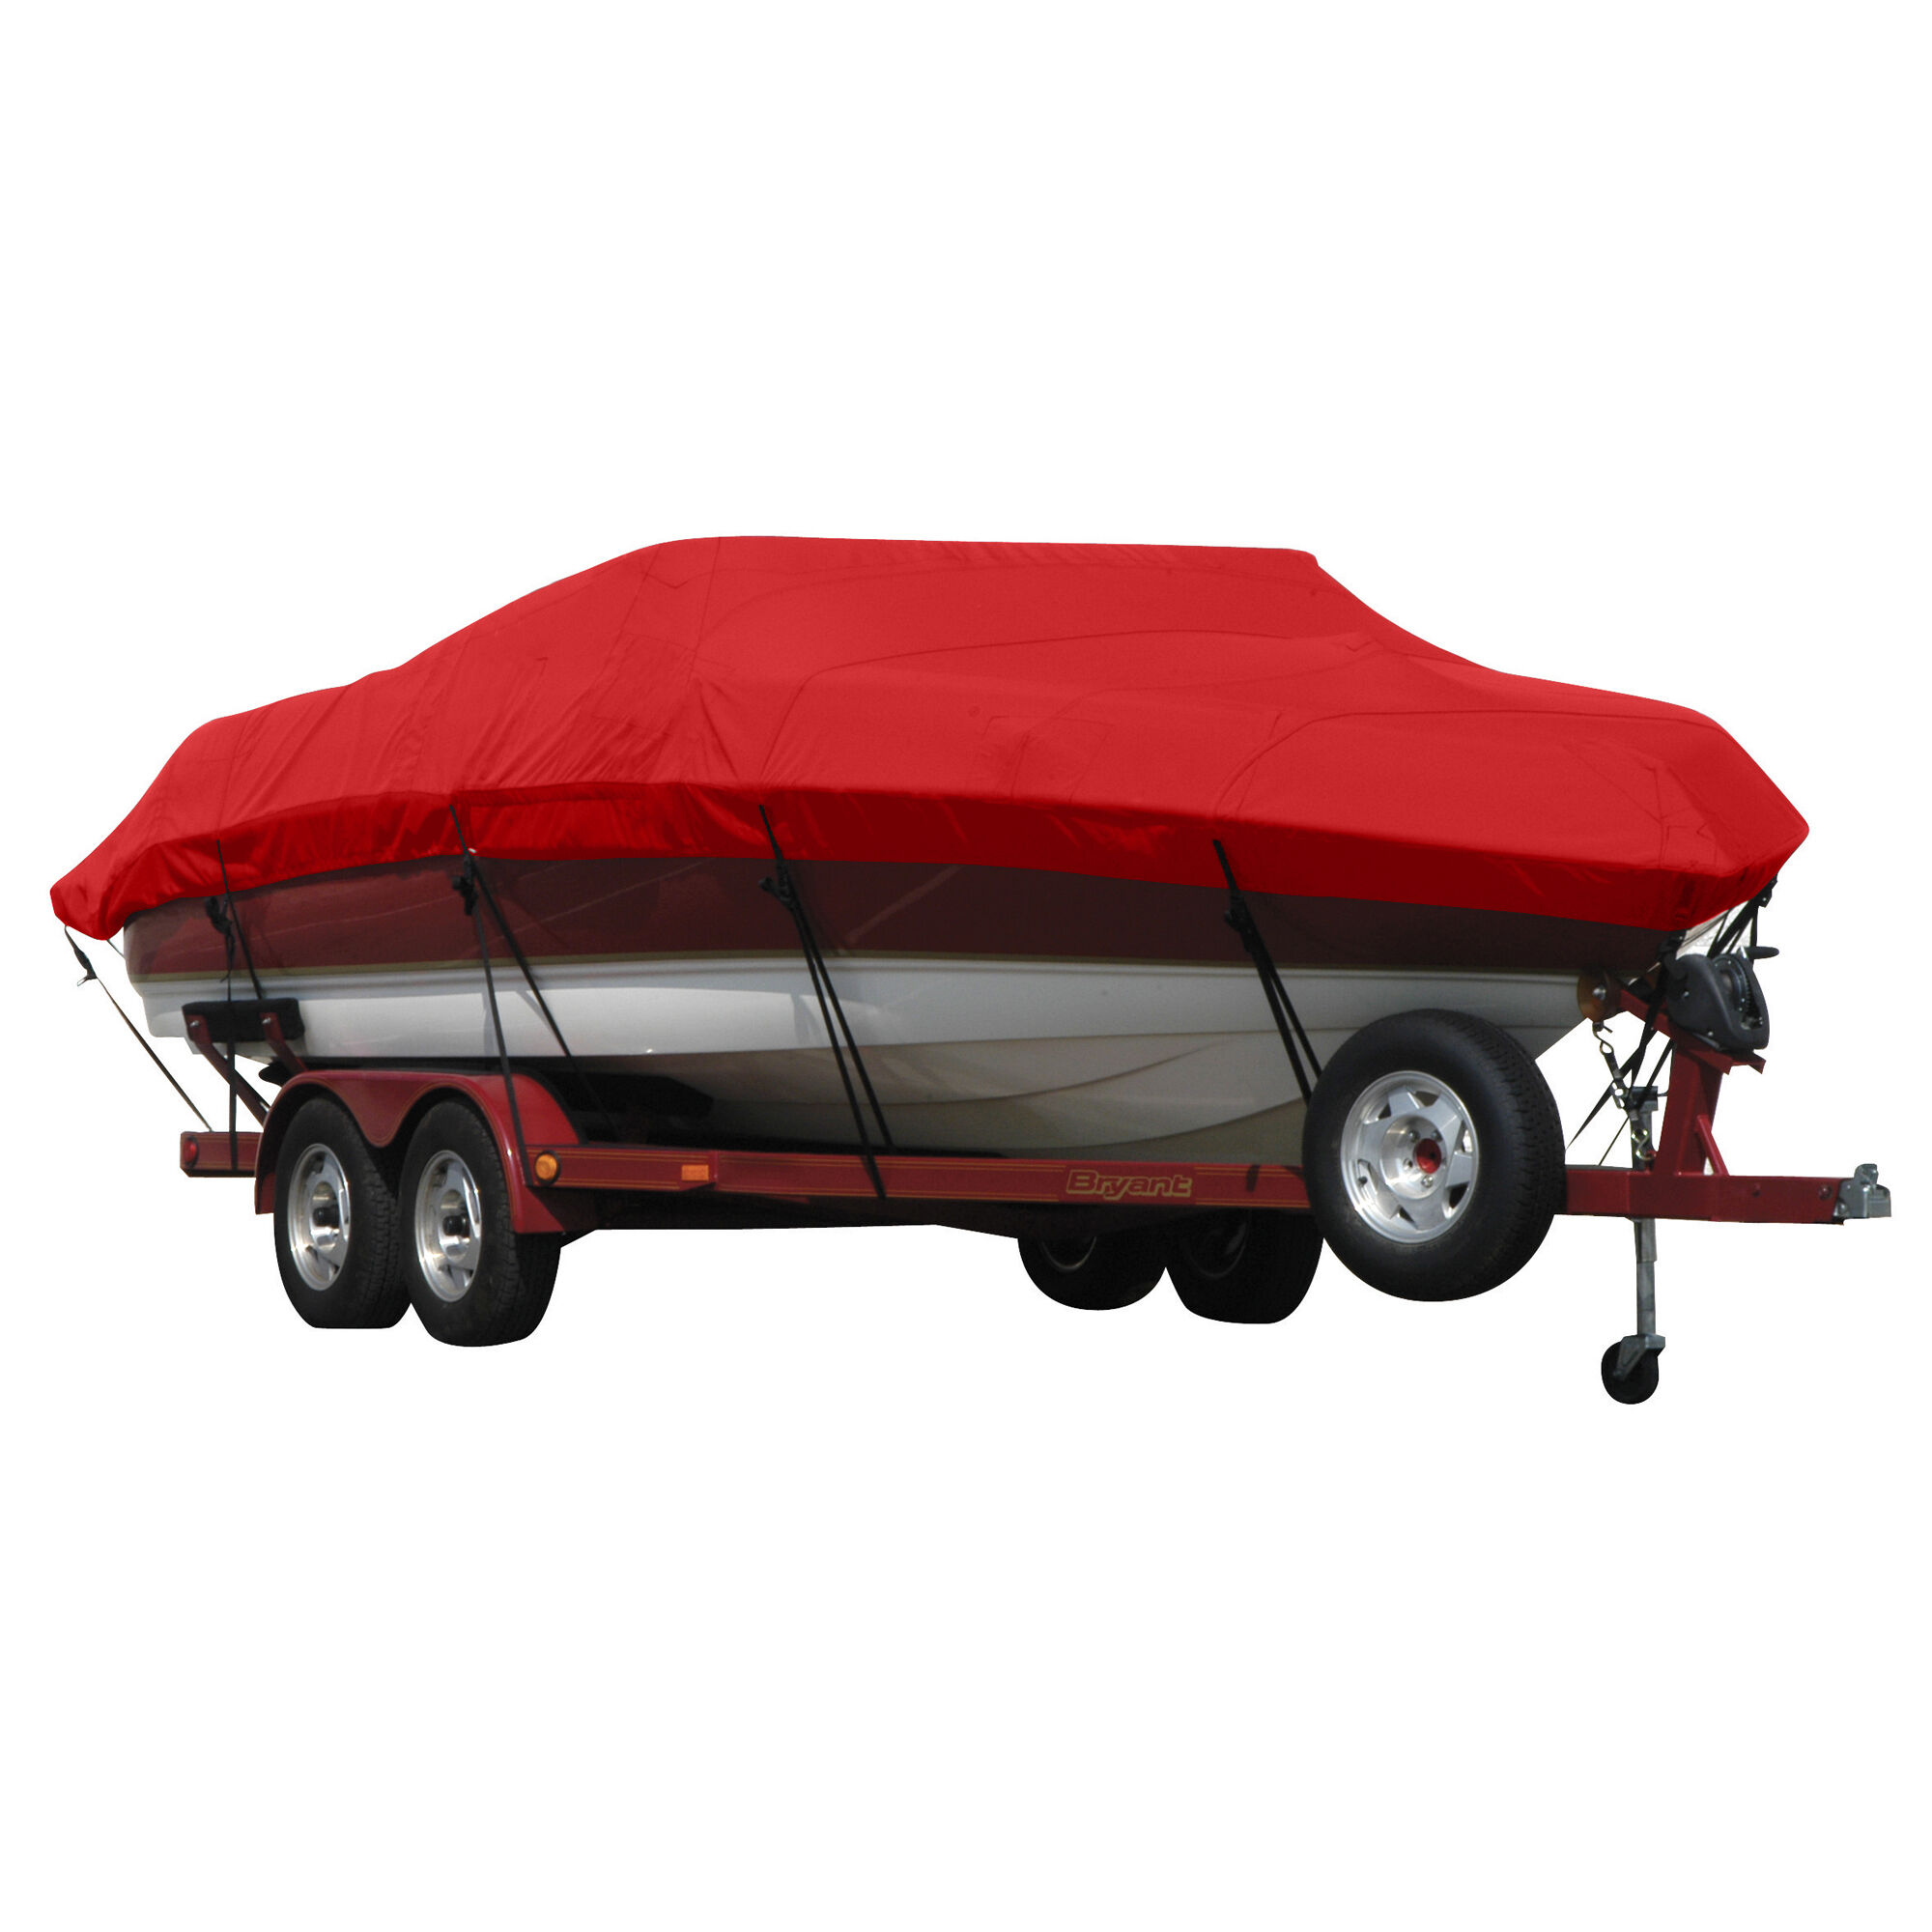 Covermate Exact Fit Sunbrella Boat Cover for Bayliner Ciera 2755 Ss Ciera 2755 Ss With Wing I/O. Jockey Red Acrylic